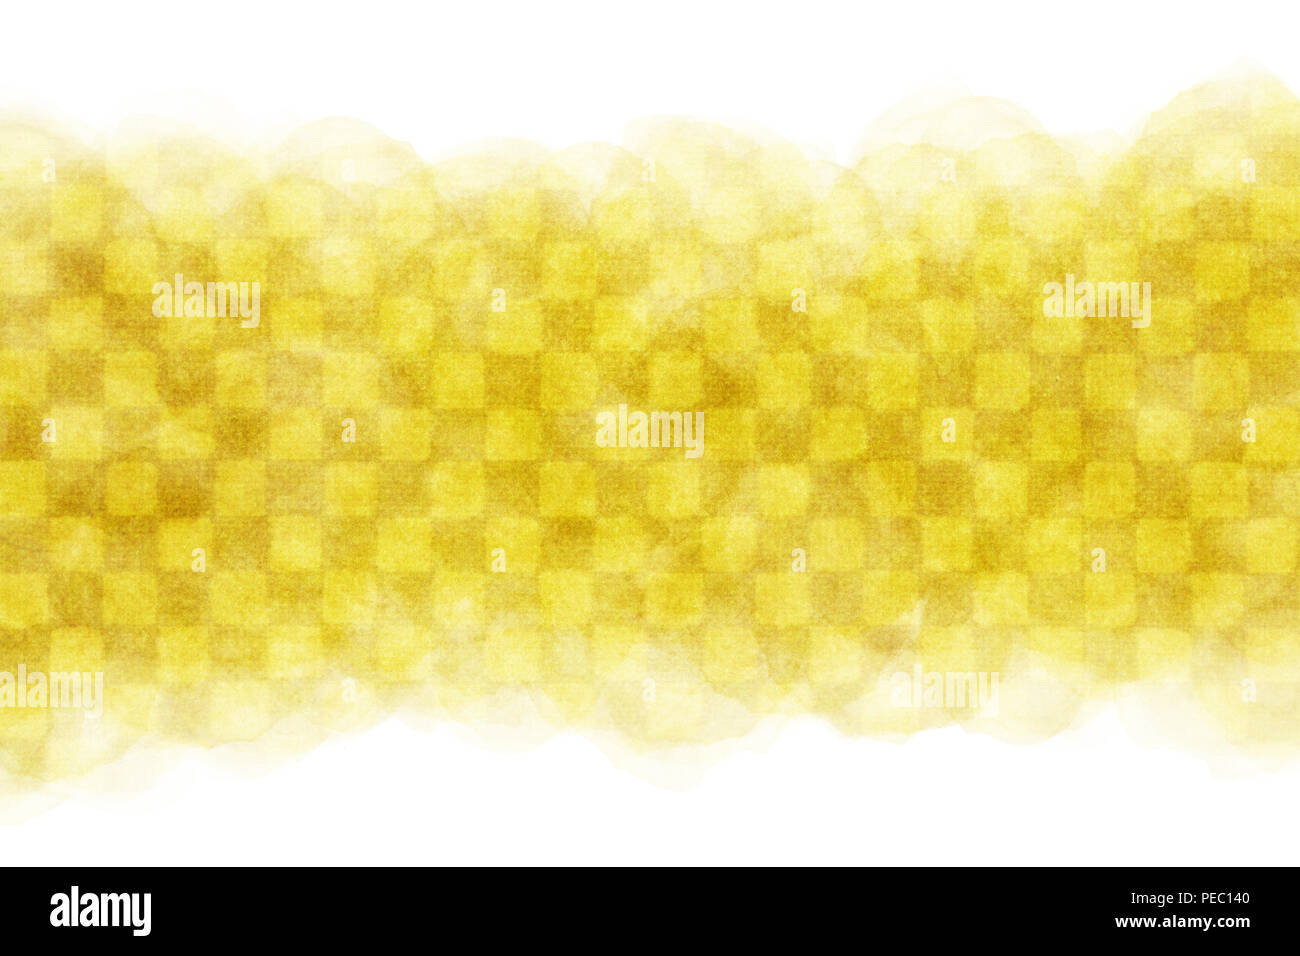 Japanese yellow checkered pattern watercolor abstract or vintage paint background Stock Photo